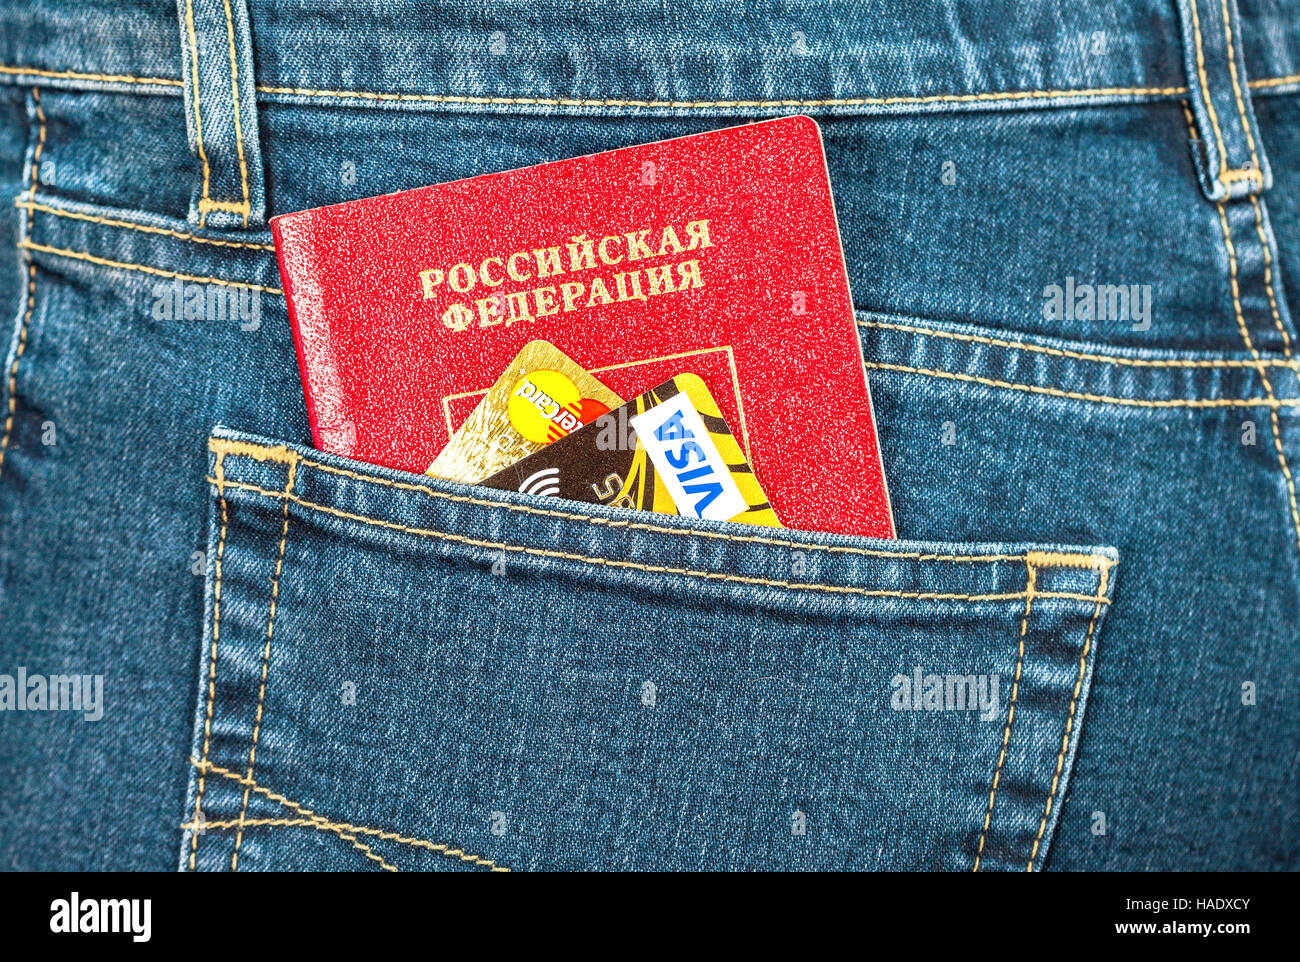 Russian passport and credit cards in back jeans pocket. Travel concept